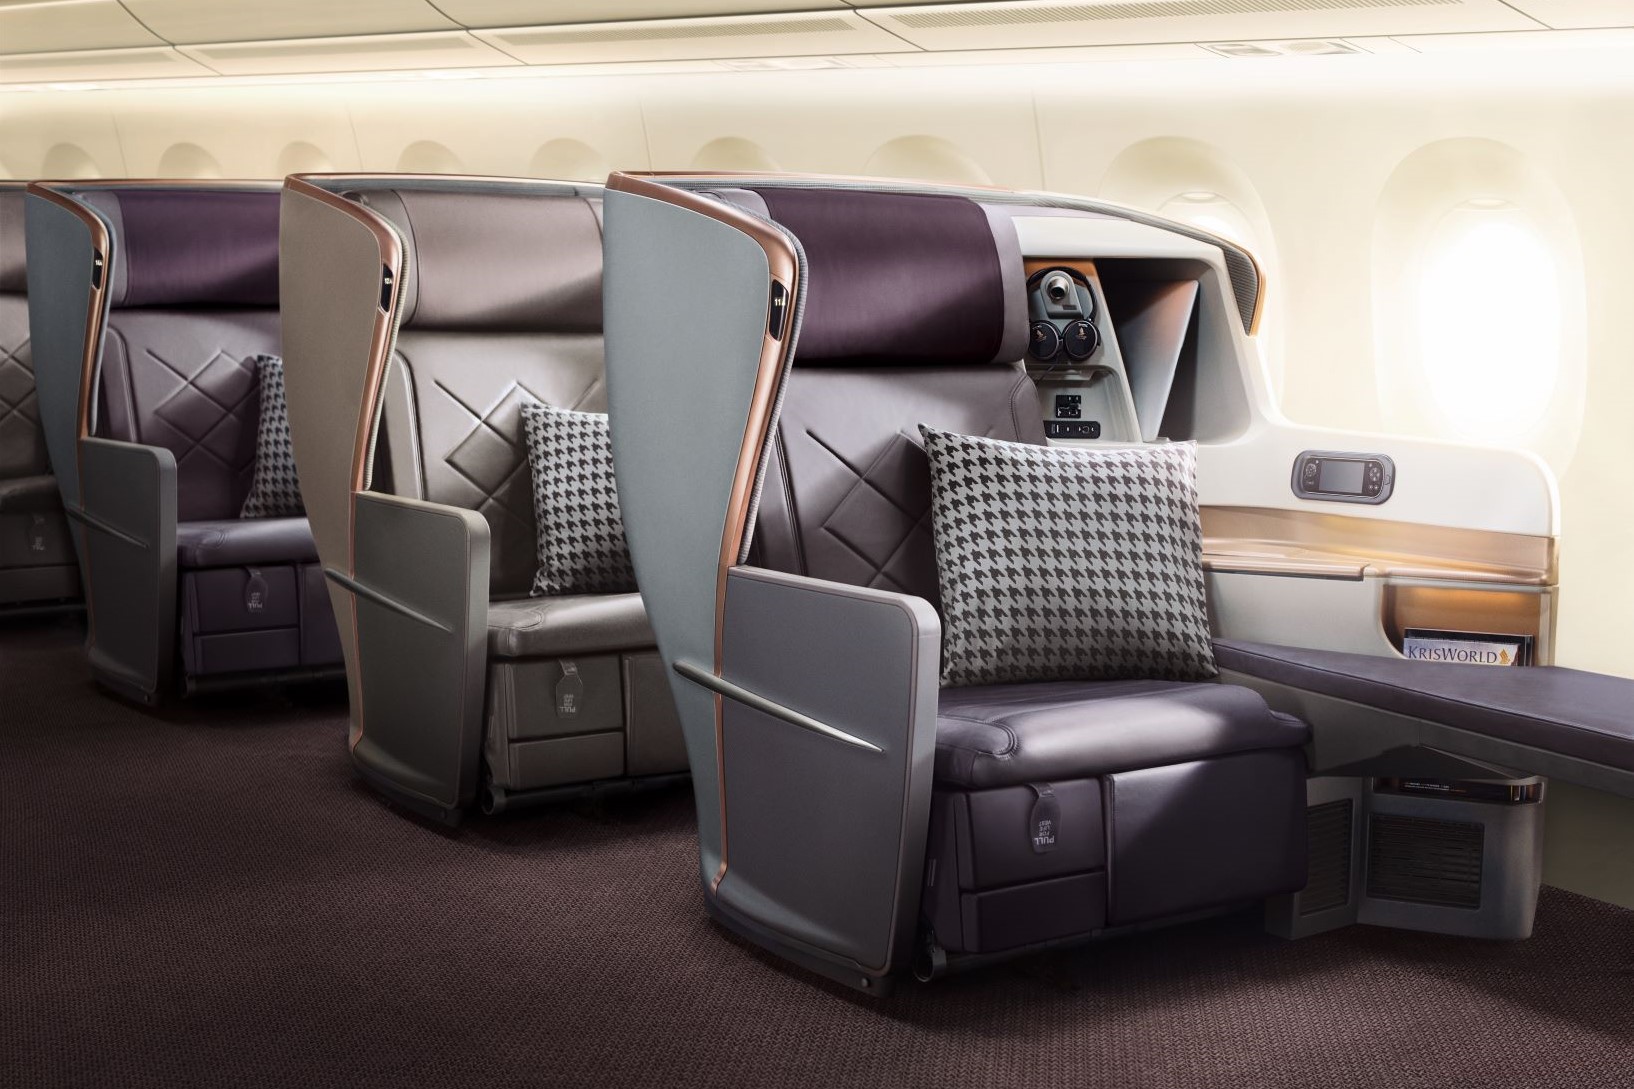 Singapore Airlines A350 Business Class